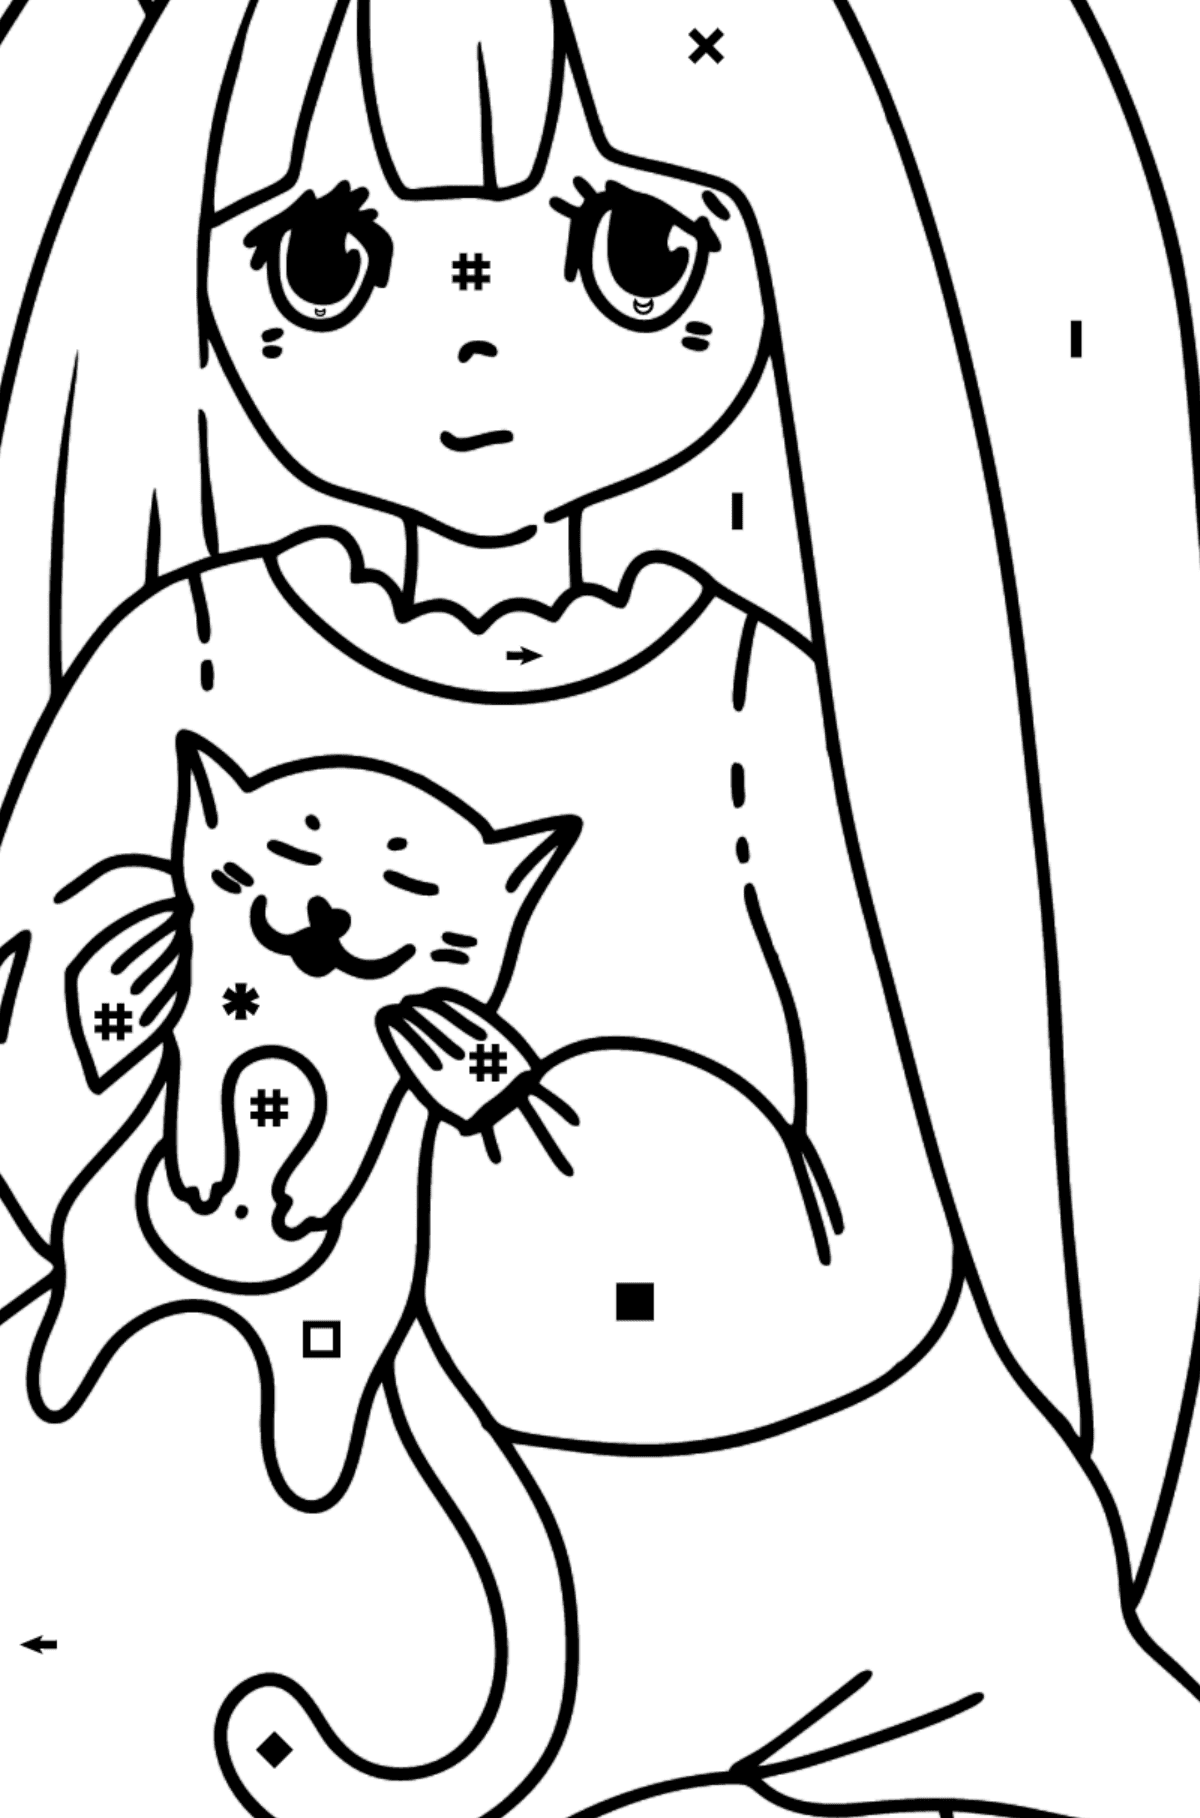 Anime Girl Playing with Kitten coloring page - Coloring by Symbols for Kids